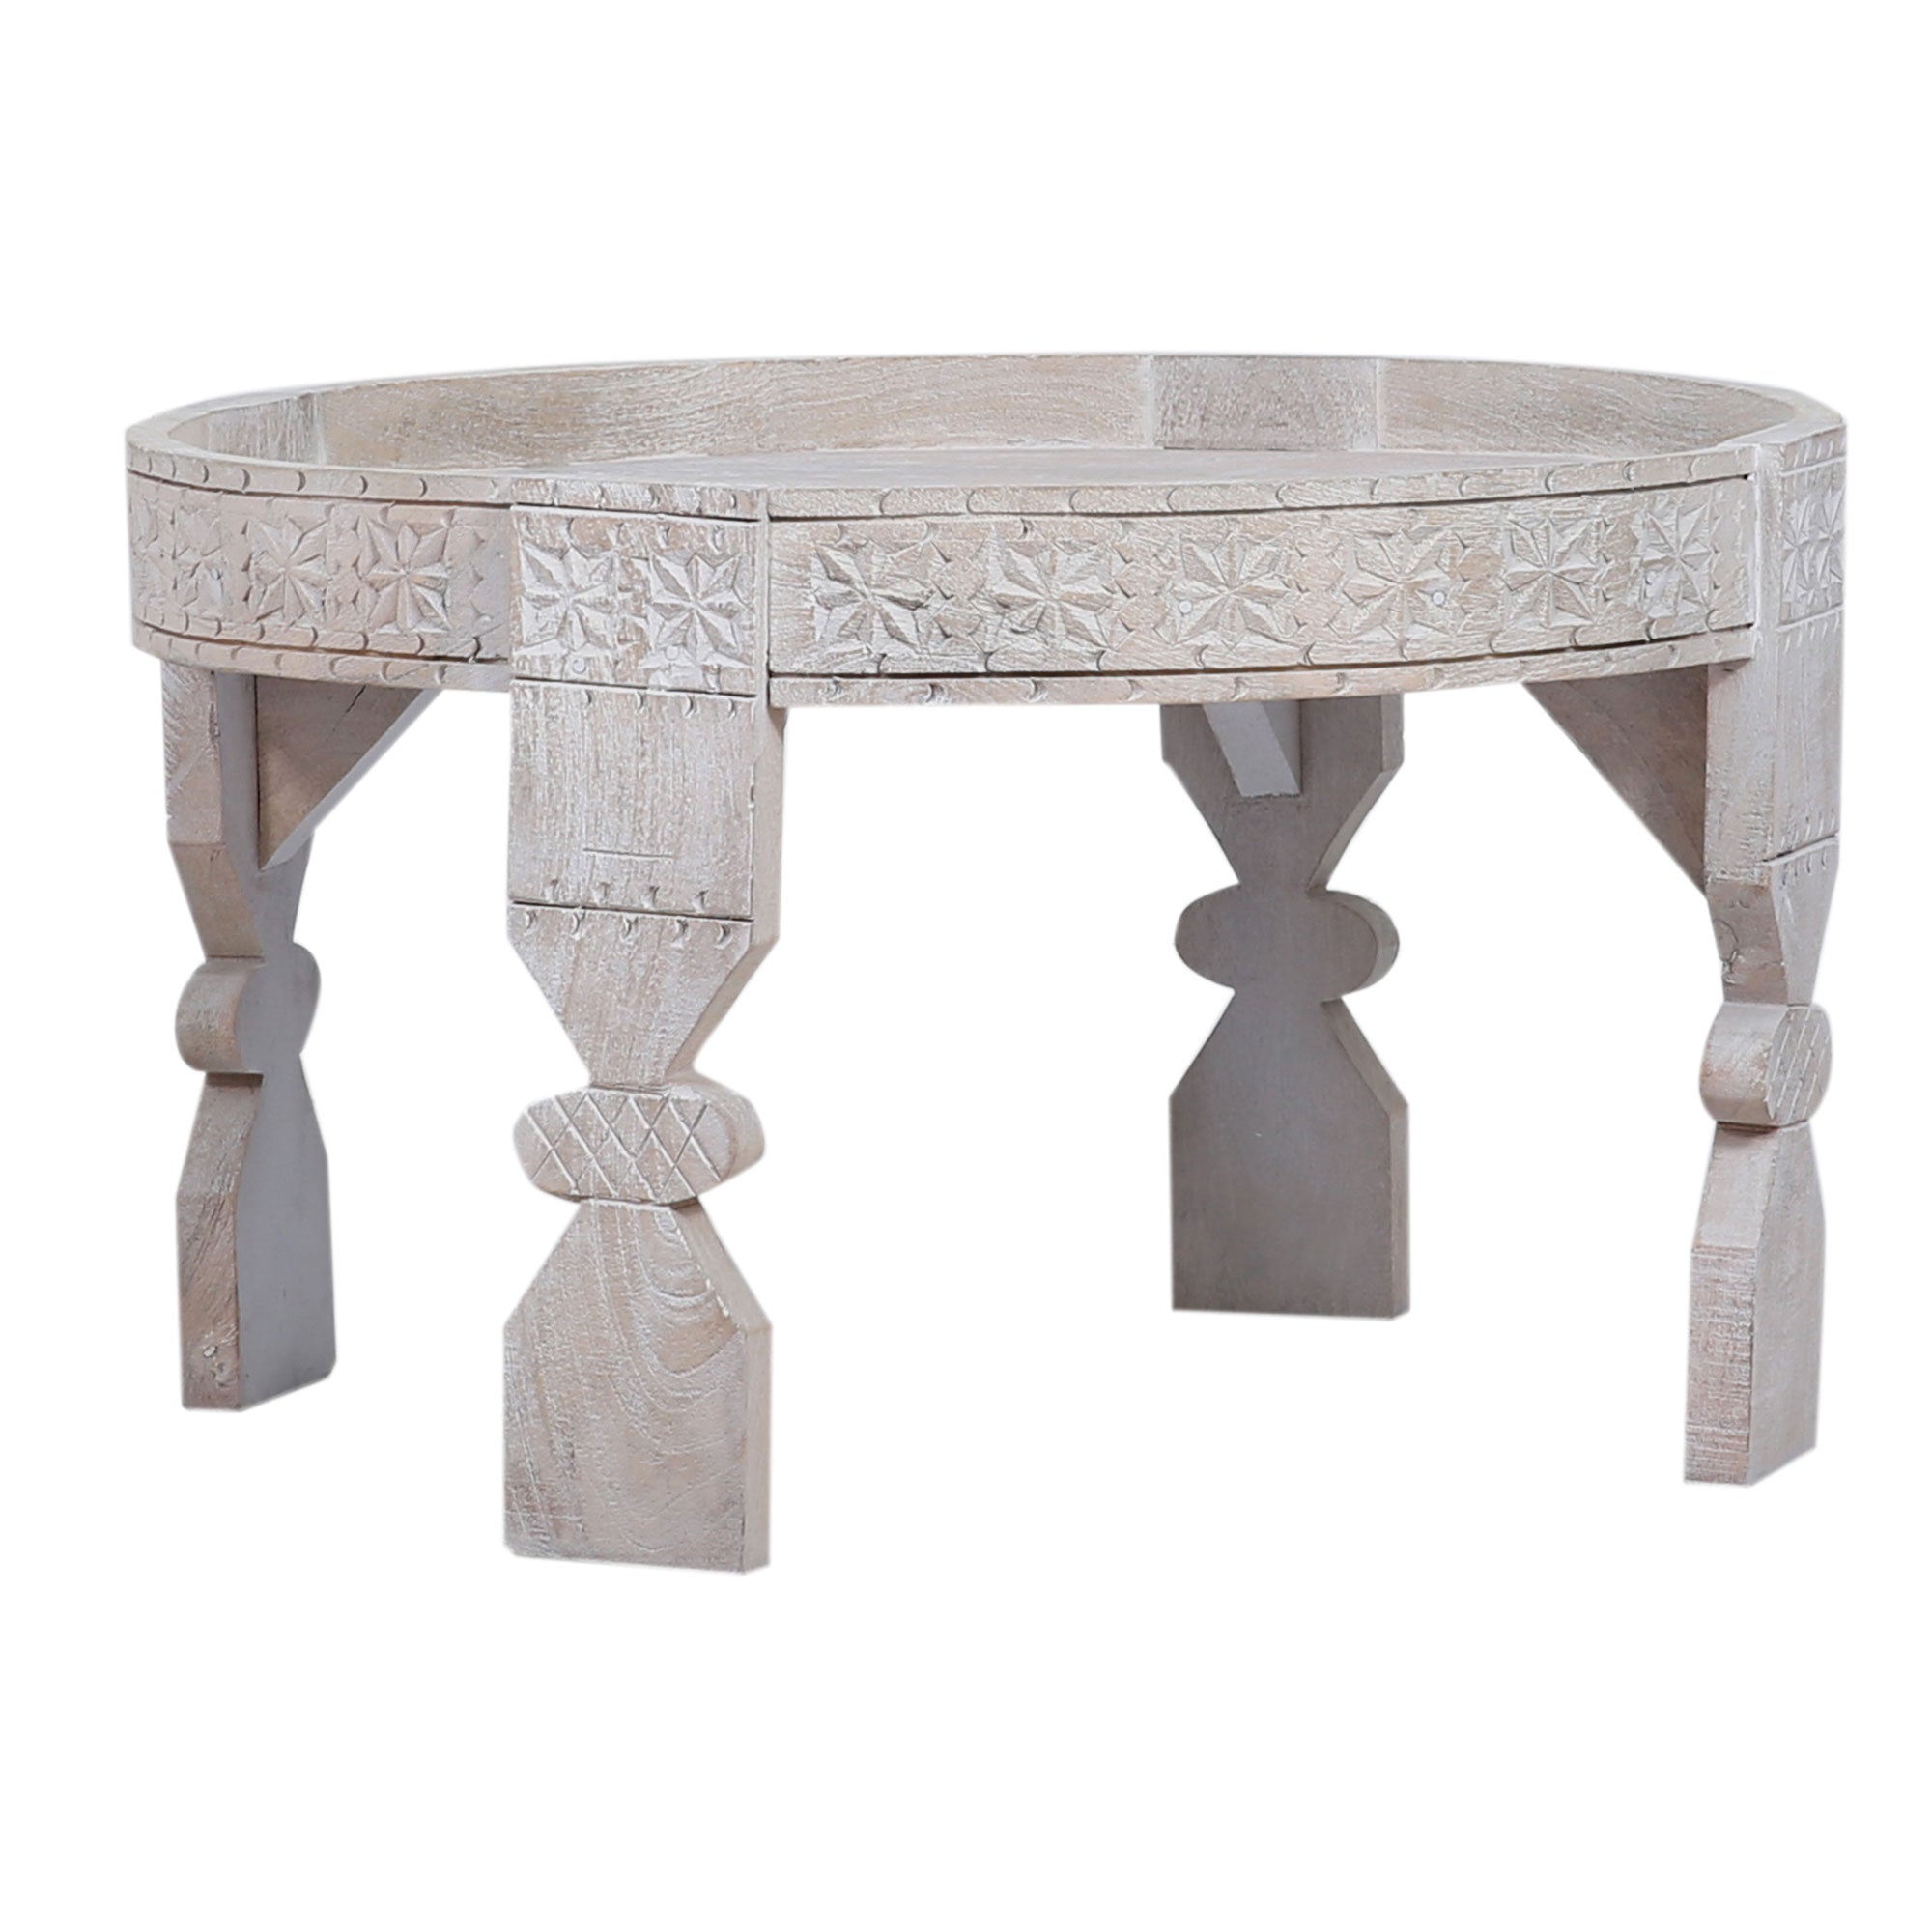 Ananya Nomad Round Wooden Coffee Table in Distressed White Finish in Accent Tables by VMInnovations